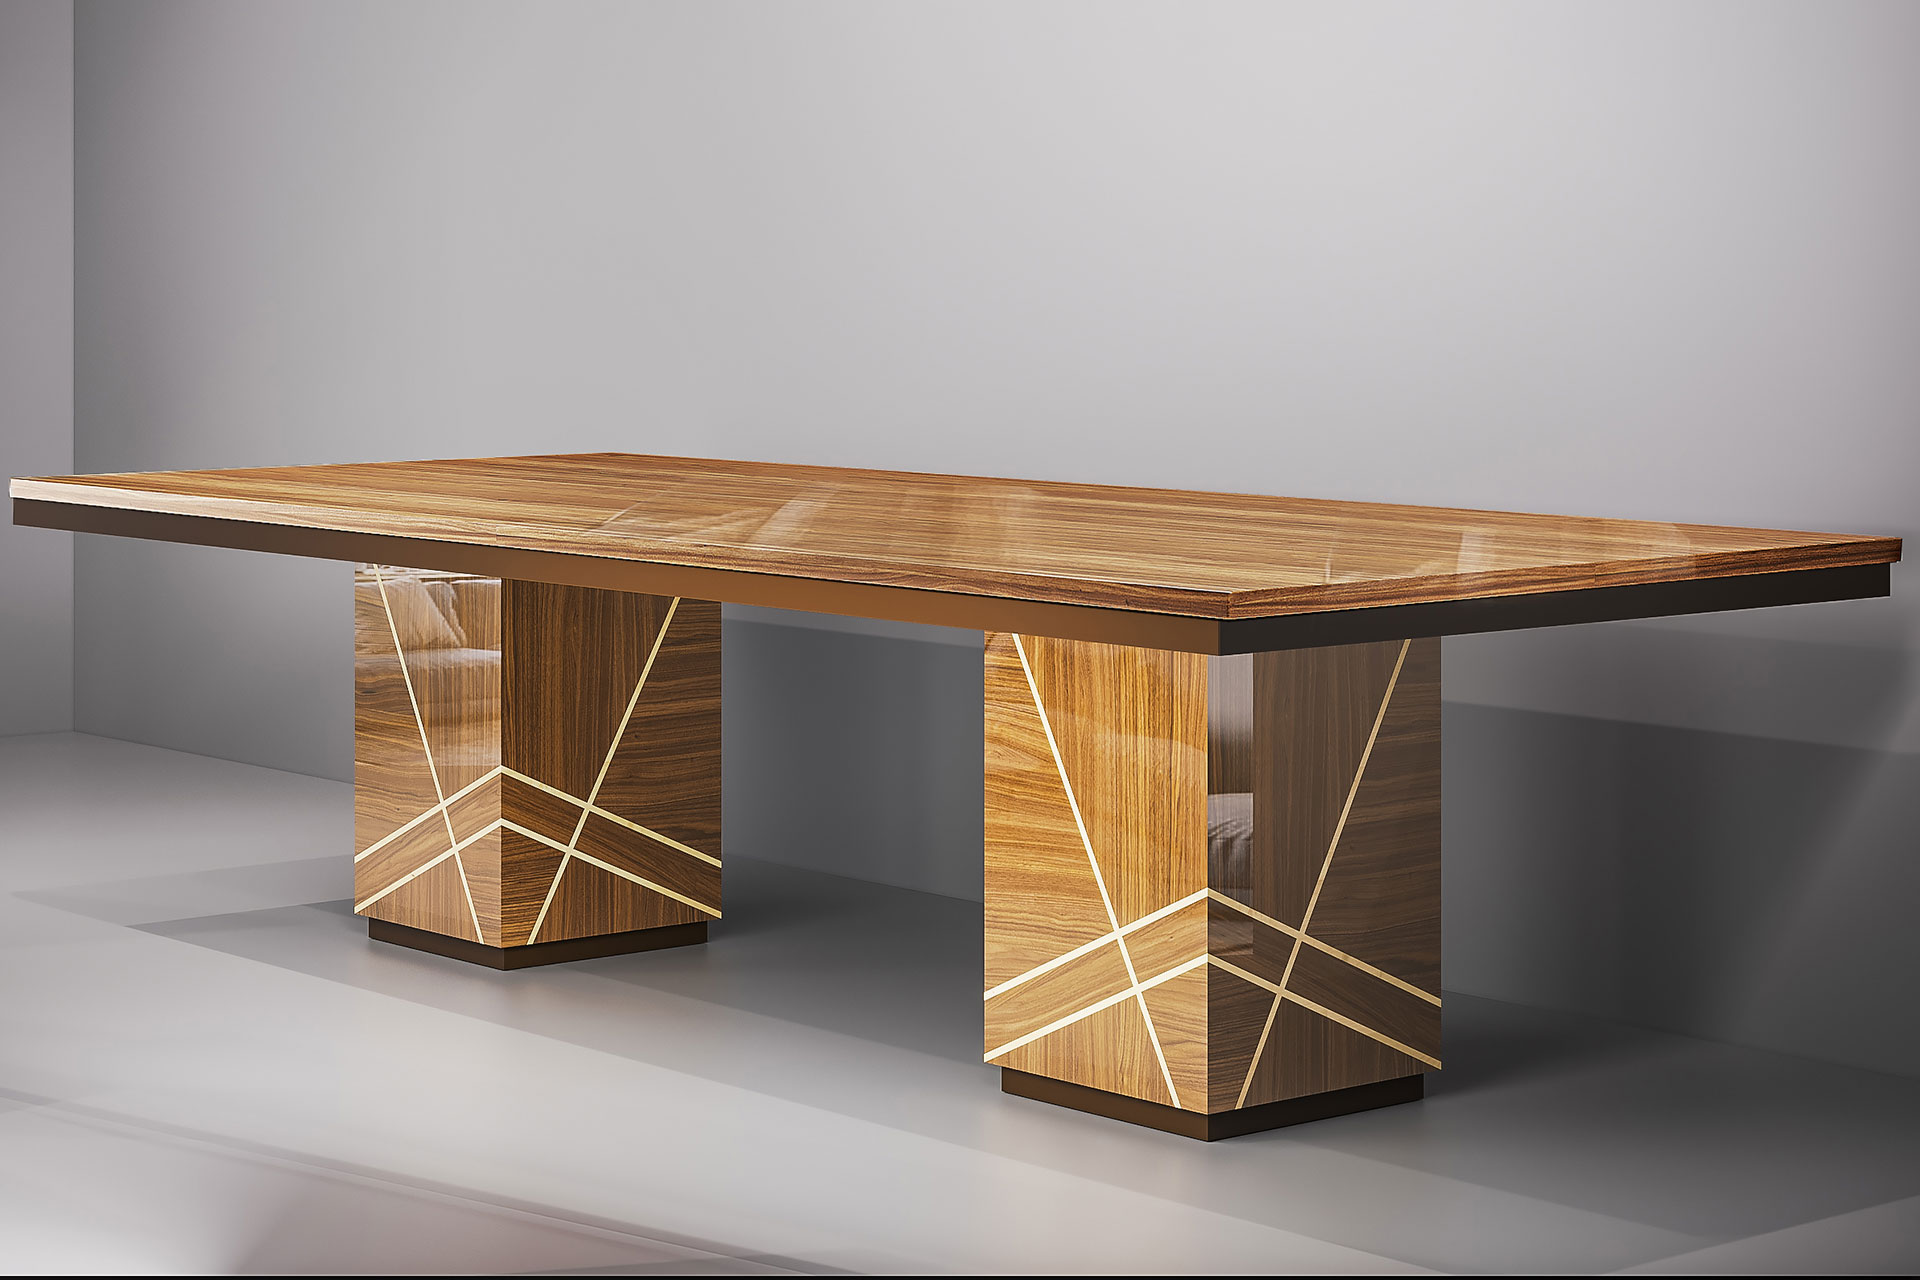 Kitchen dining table made of wood and veneer